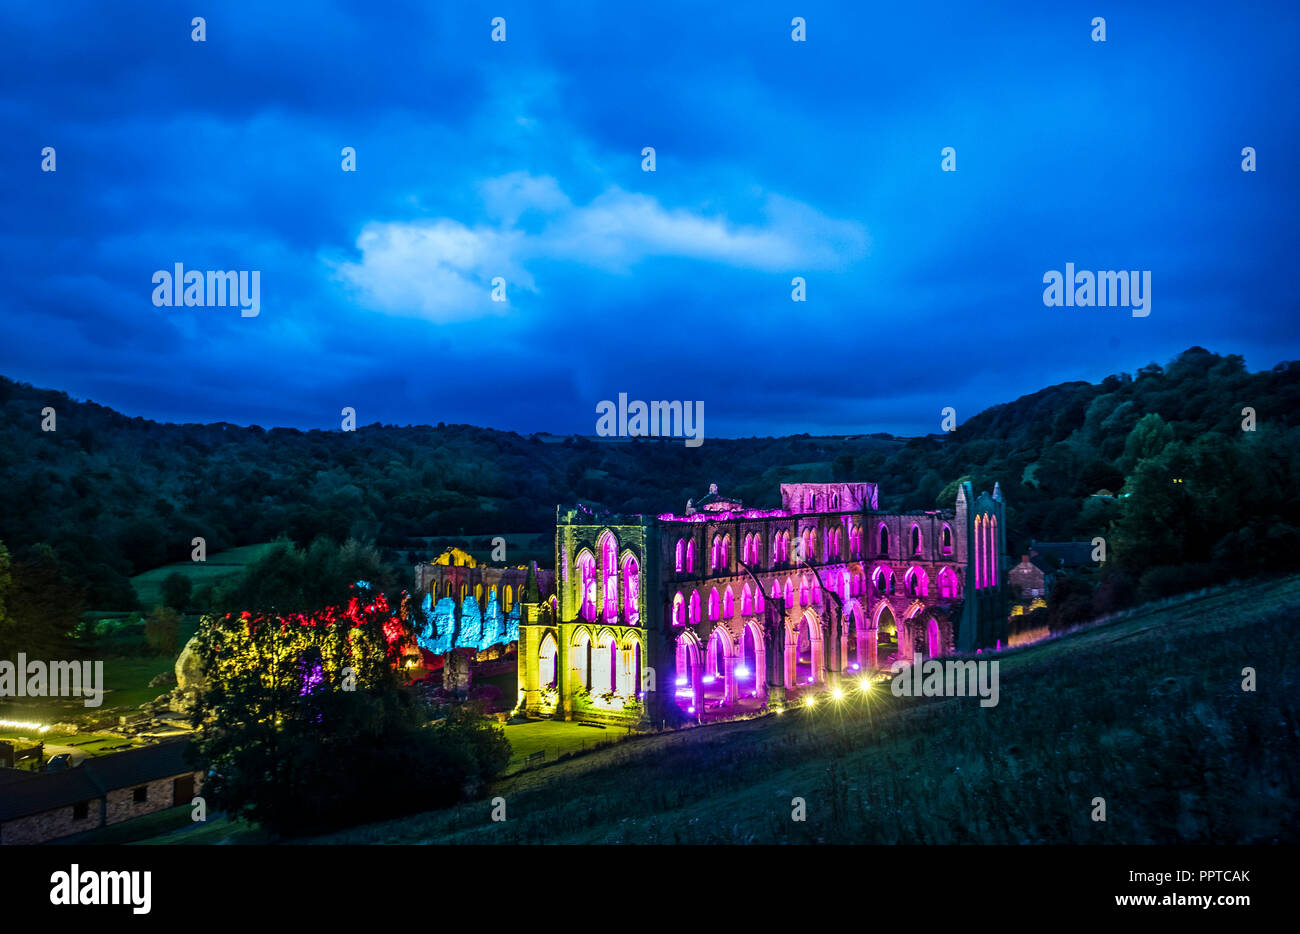 Rievaulx Abbey bathed in coloured light ahead of Illuminating Rievaulx, a three night light and sound installation at the 11th-century abbey ruins in North Yorkshire. Stock Photo